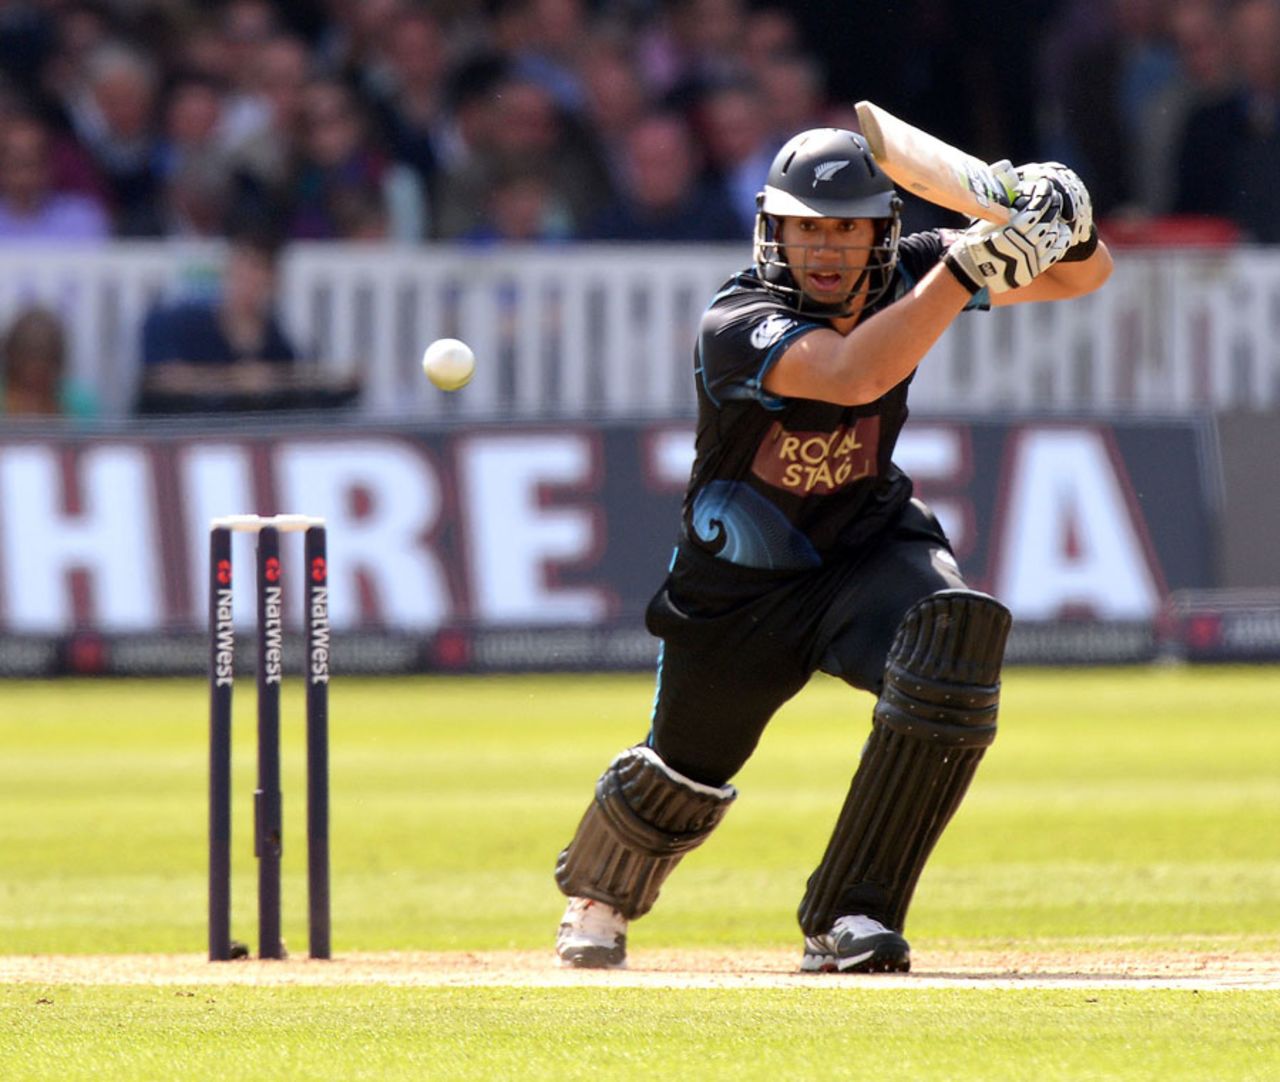 Ross Taylor steadied the ship for New Zealand, England v New Zealand, 1st ODI, Lord's, May 31, 2013